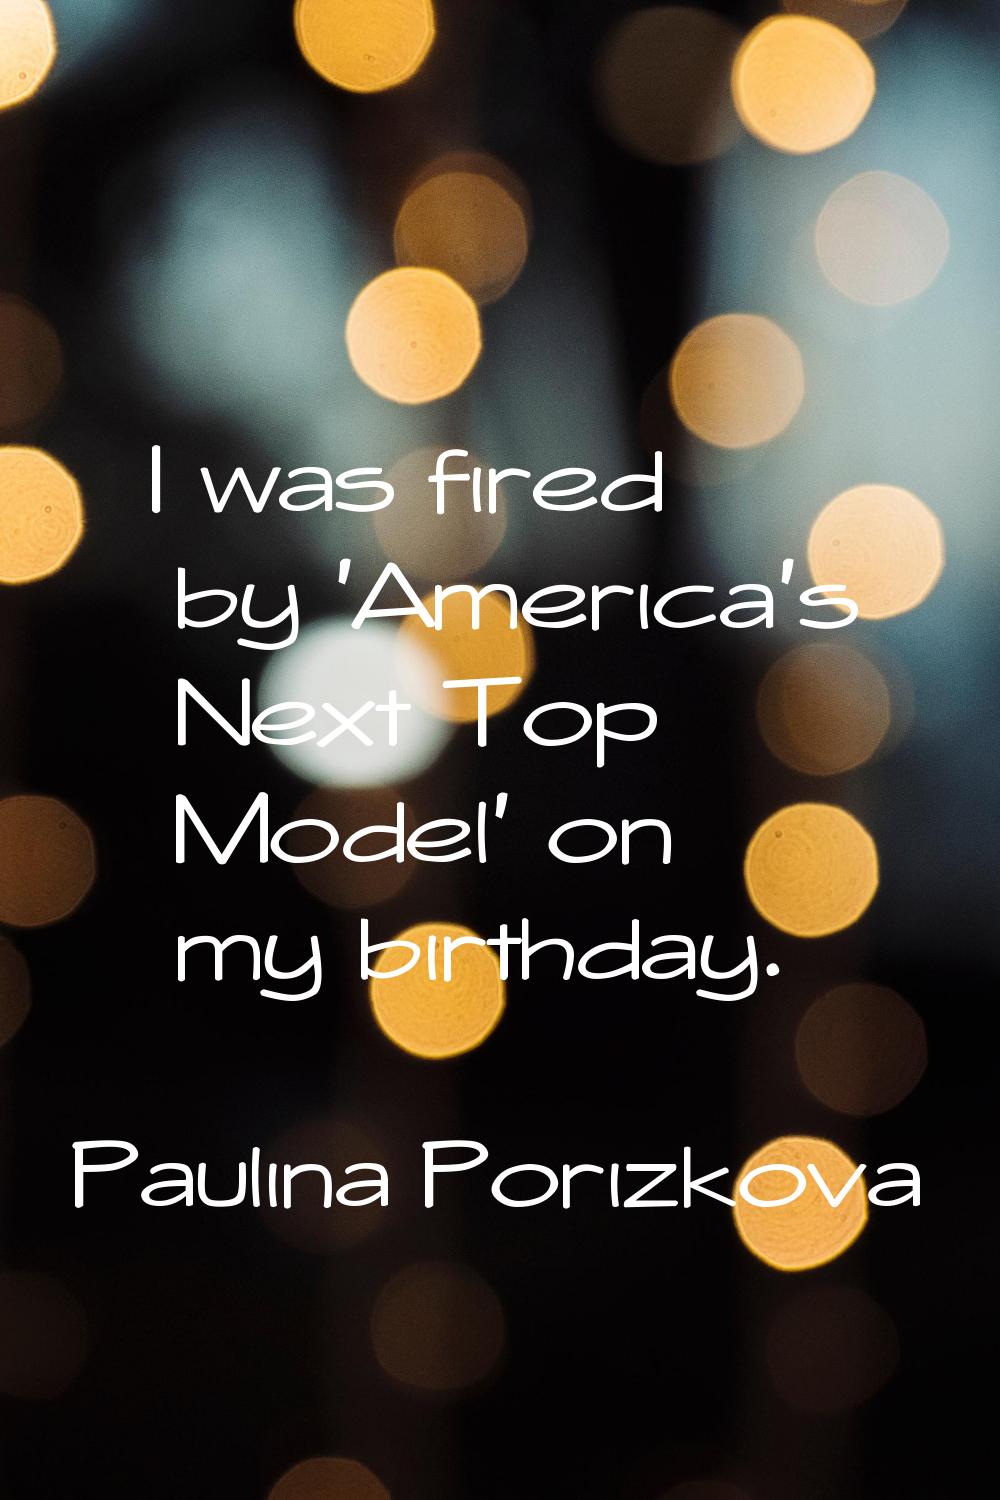 I was fired by 'America's Next Top Model' on my birthday.